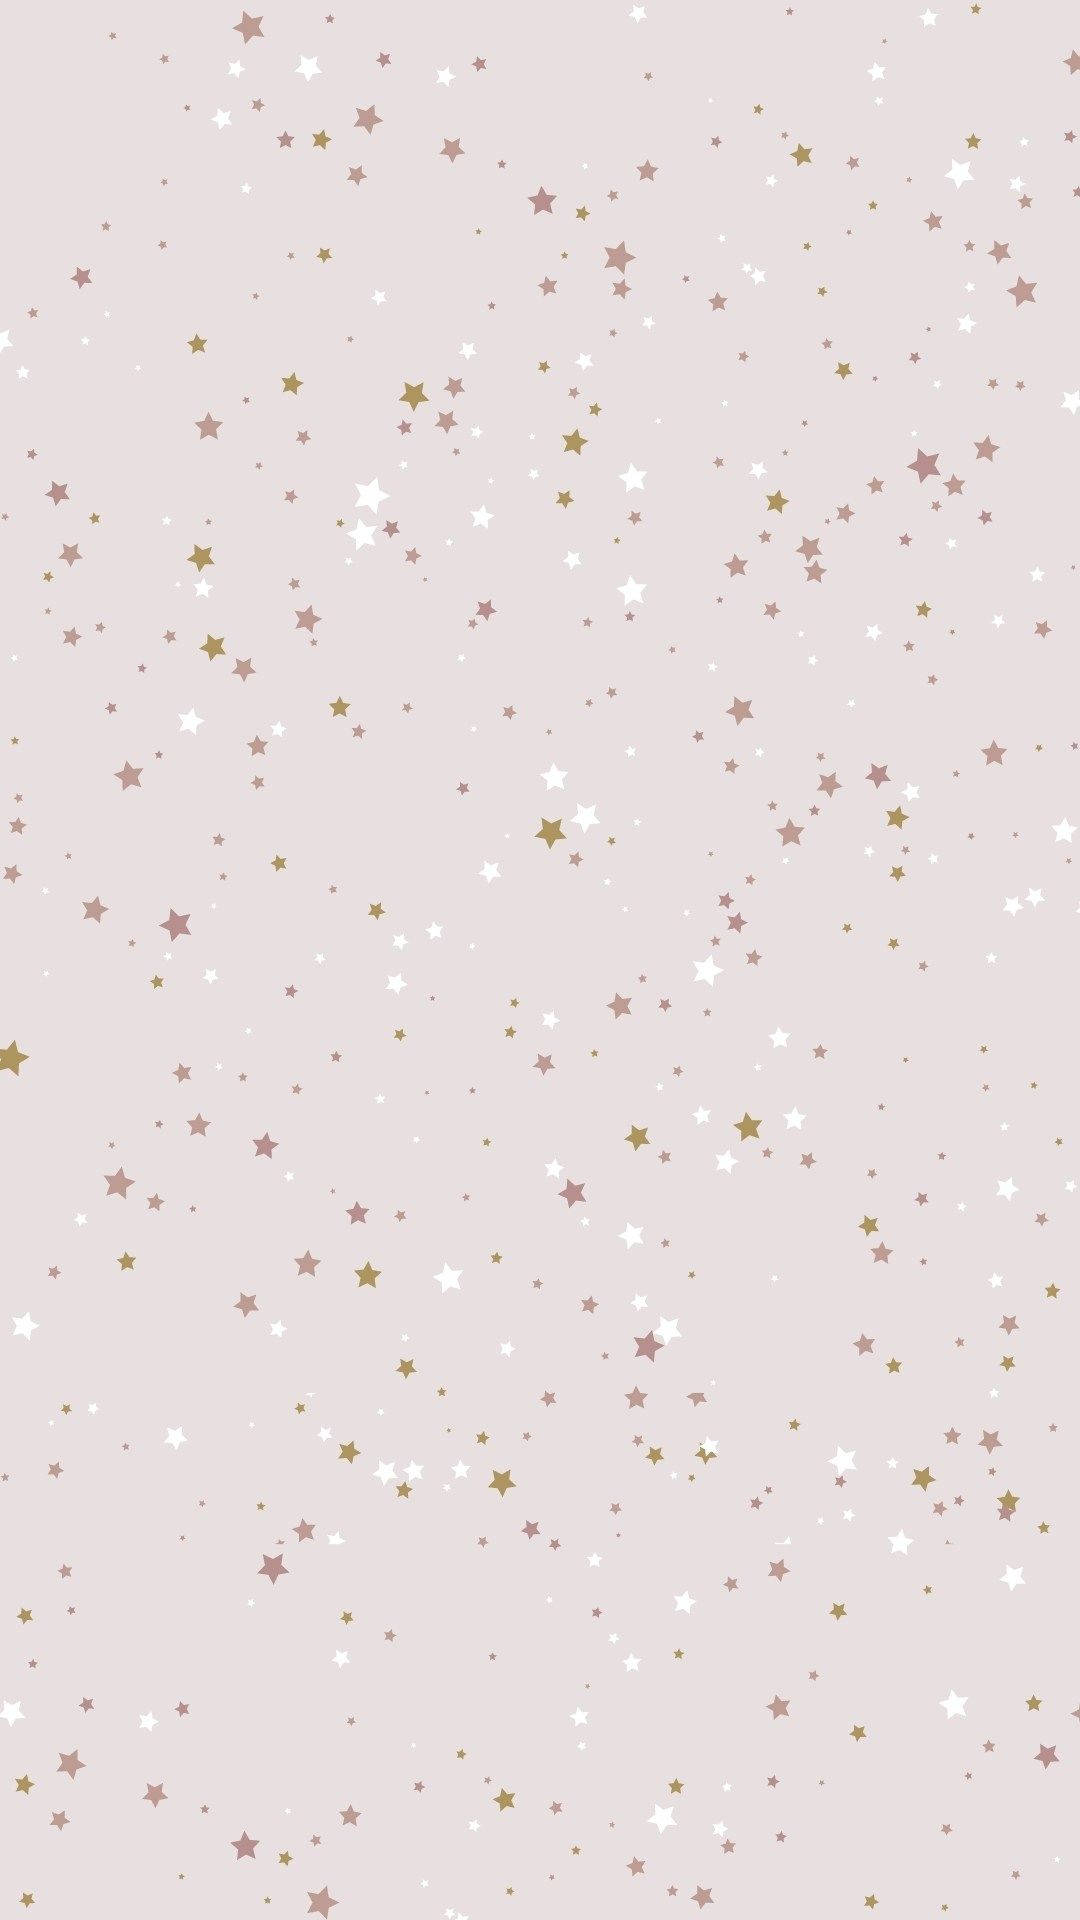 Soothing Display Of Boho-inspired Star Patterns Background